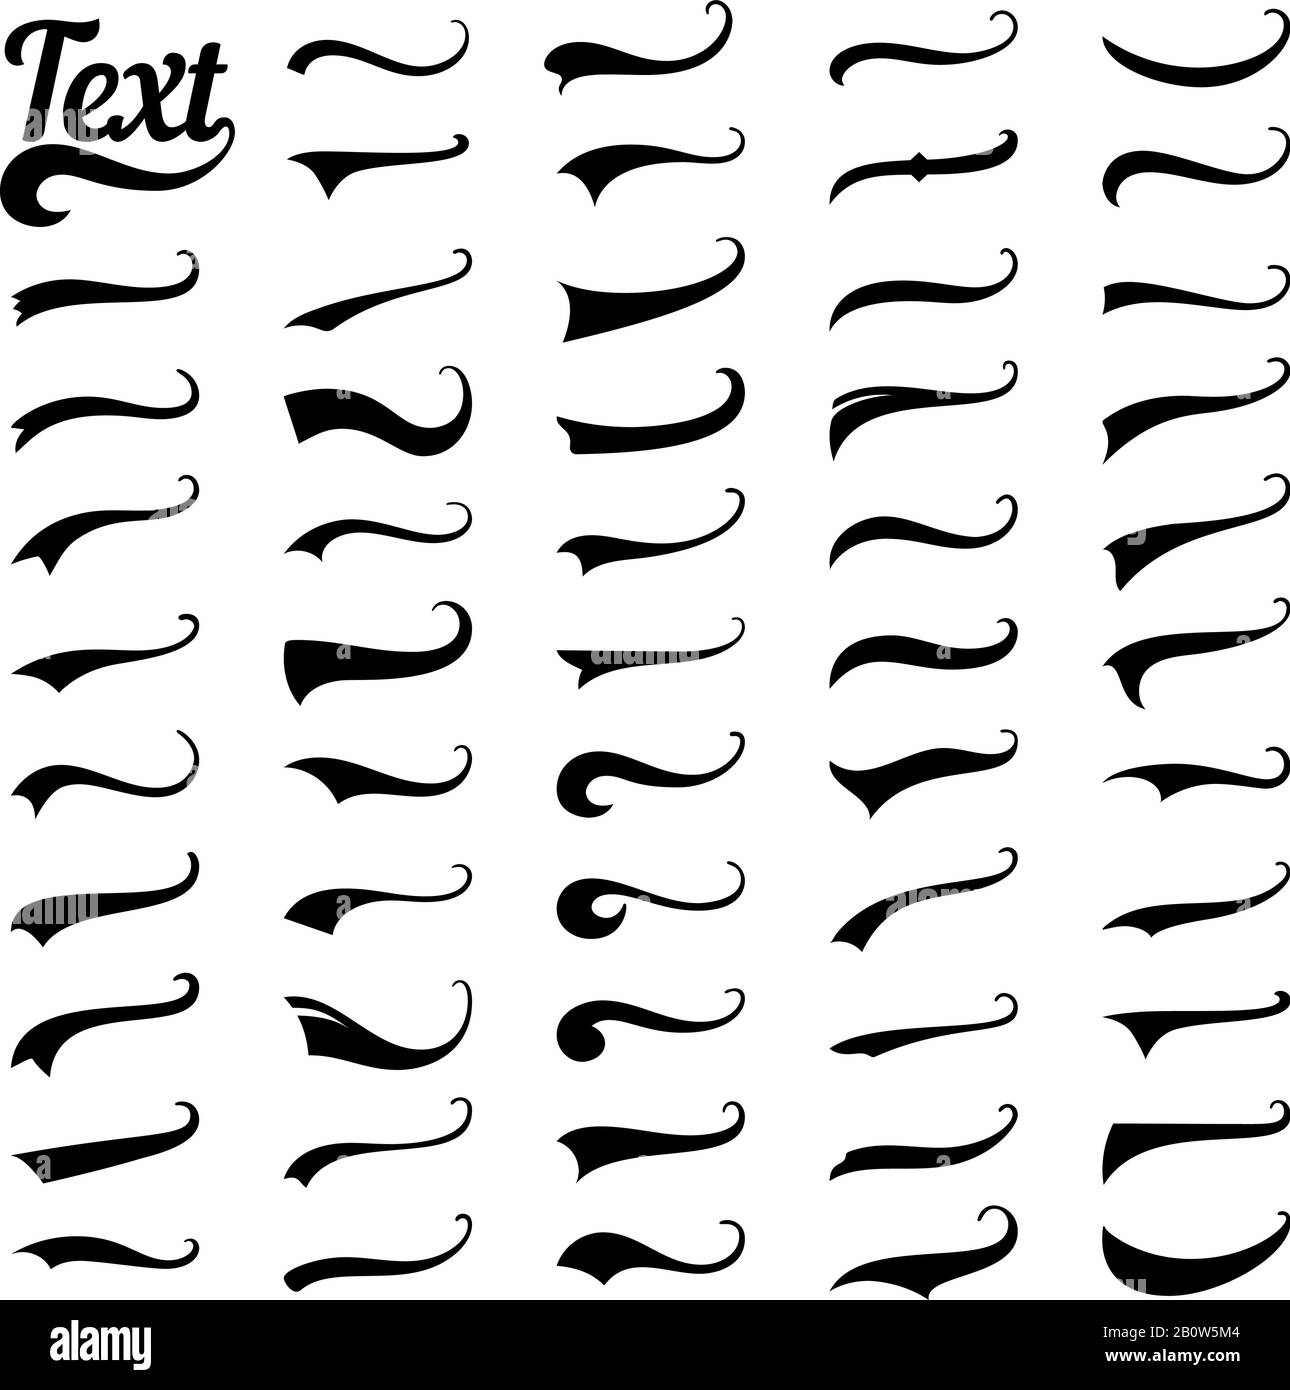 Sporty swirling tail football and baseball typography swashes. Swirled plume curly tails for retro style text vector set Stock Vector